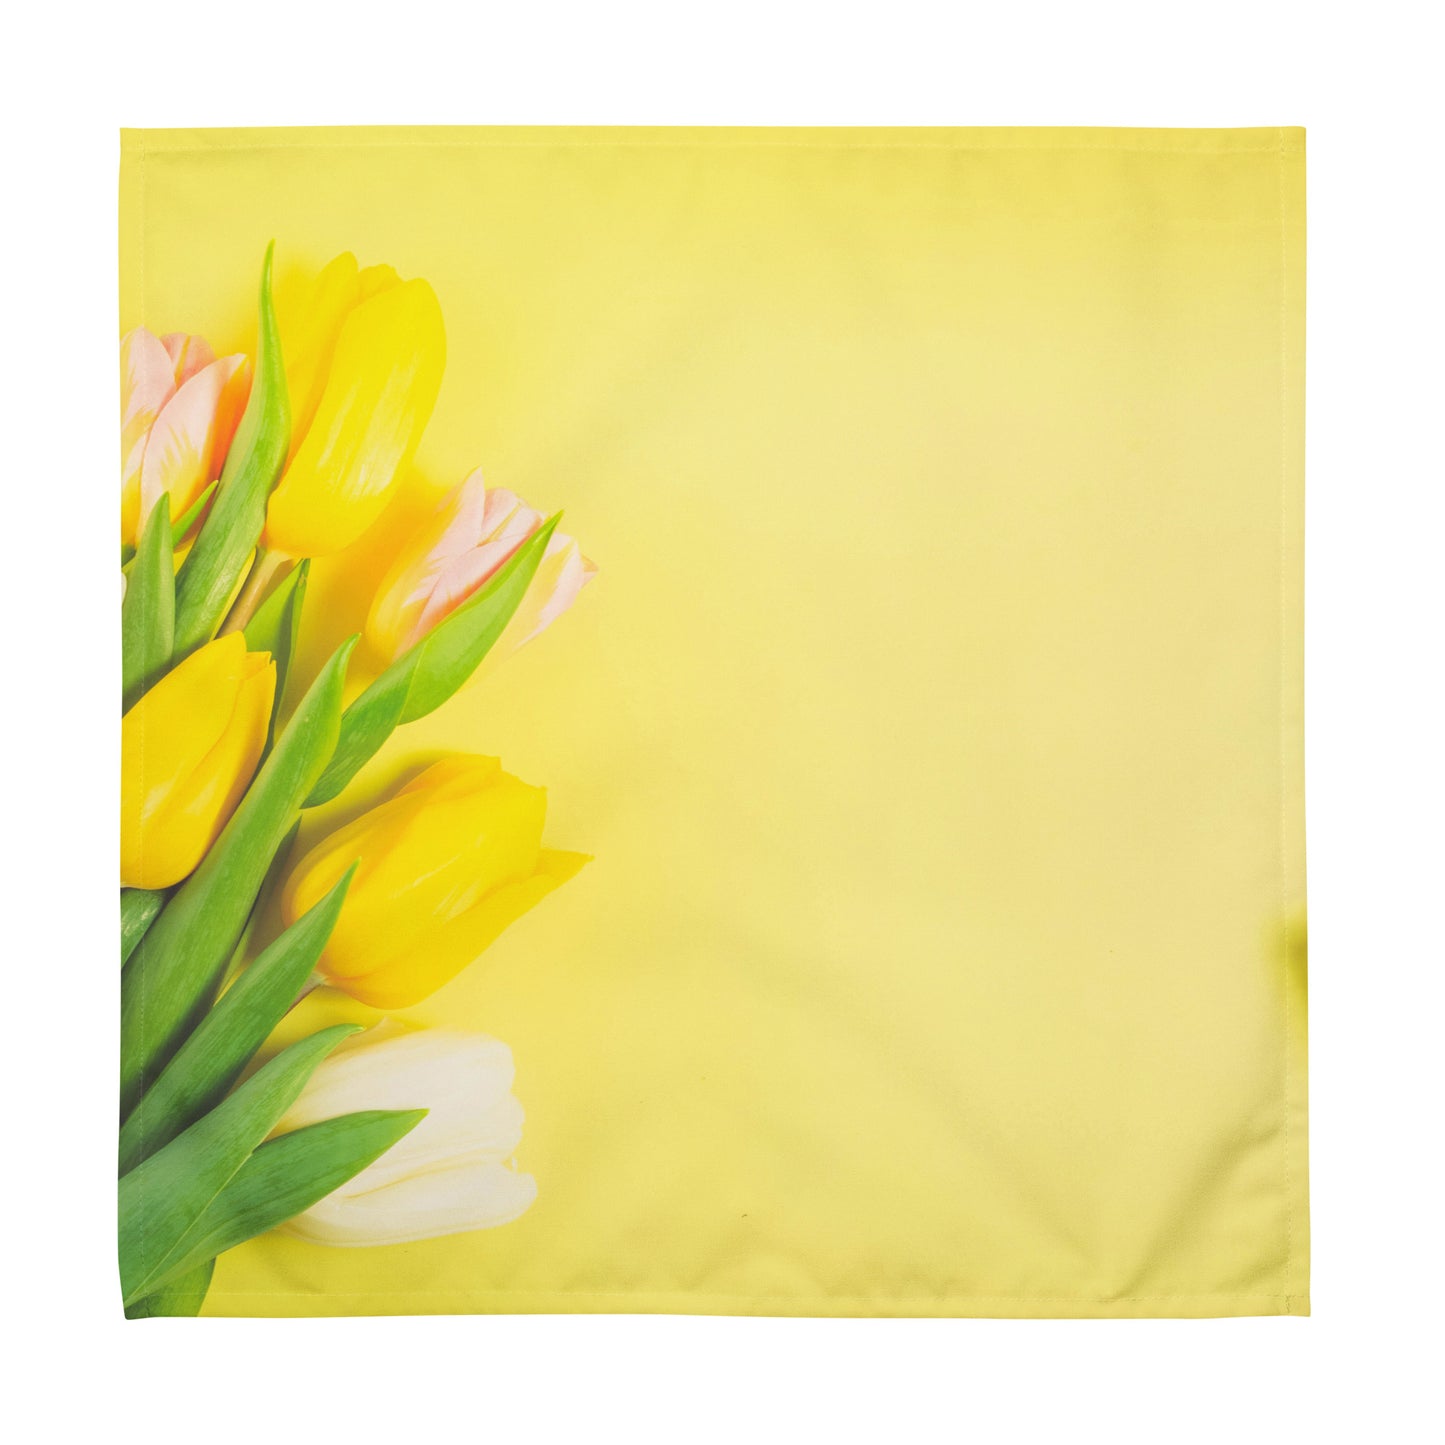 Yellow cloth napkin with white, yellow, and pink tulips on it.